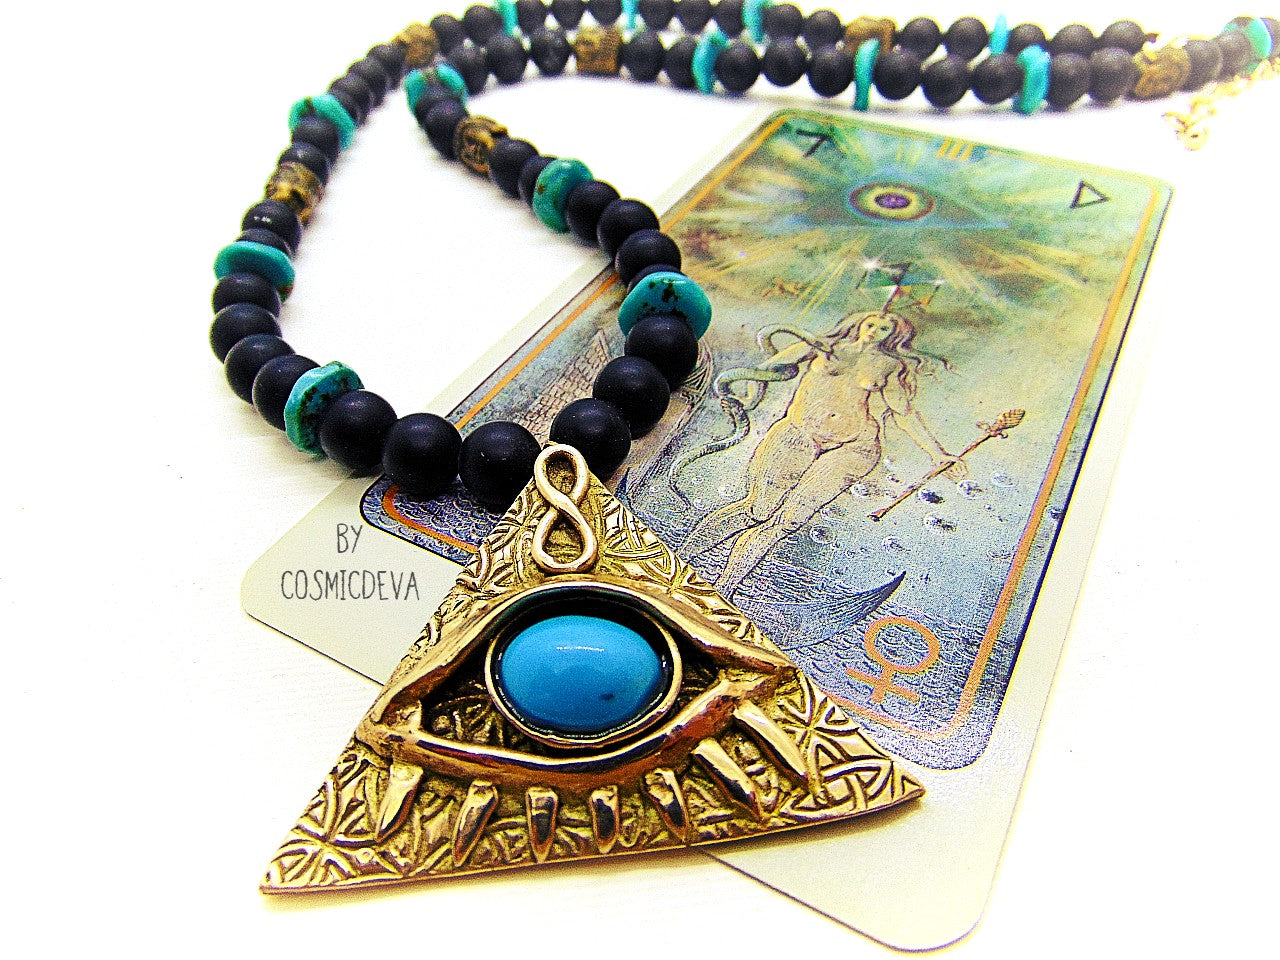 Adorn yourself with this mystical completely hand sculptured bronze All Seeing Eye necklace and protect your soul with its natural turquoise and black onyx gemstones. Feel the spiritual energy of its Infinity symbol and antique brass buddha head beads, inspiring knowledge and positivity. Experience the power of the eye each time you wear it!